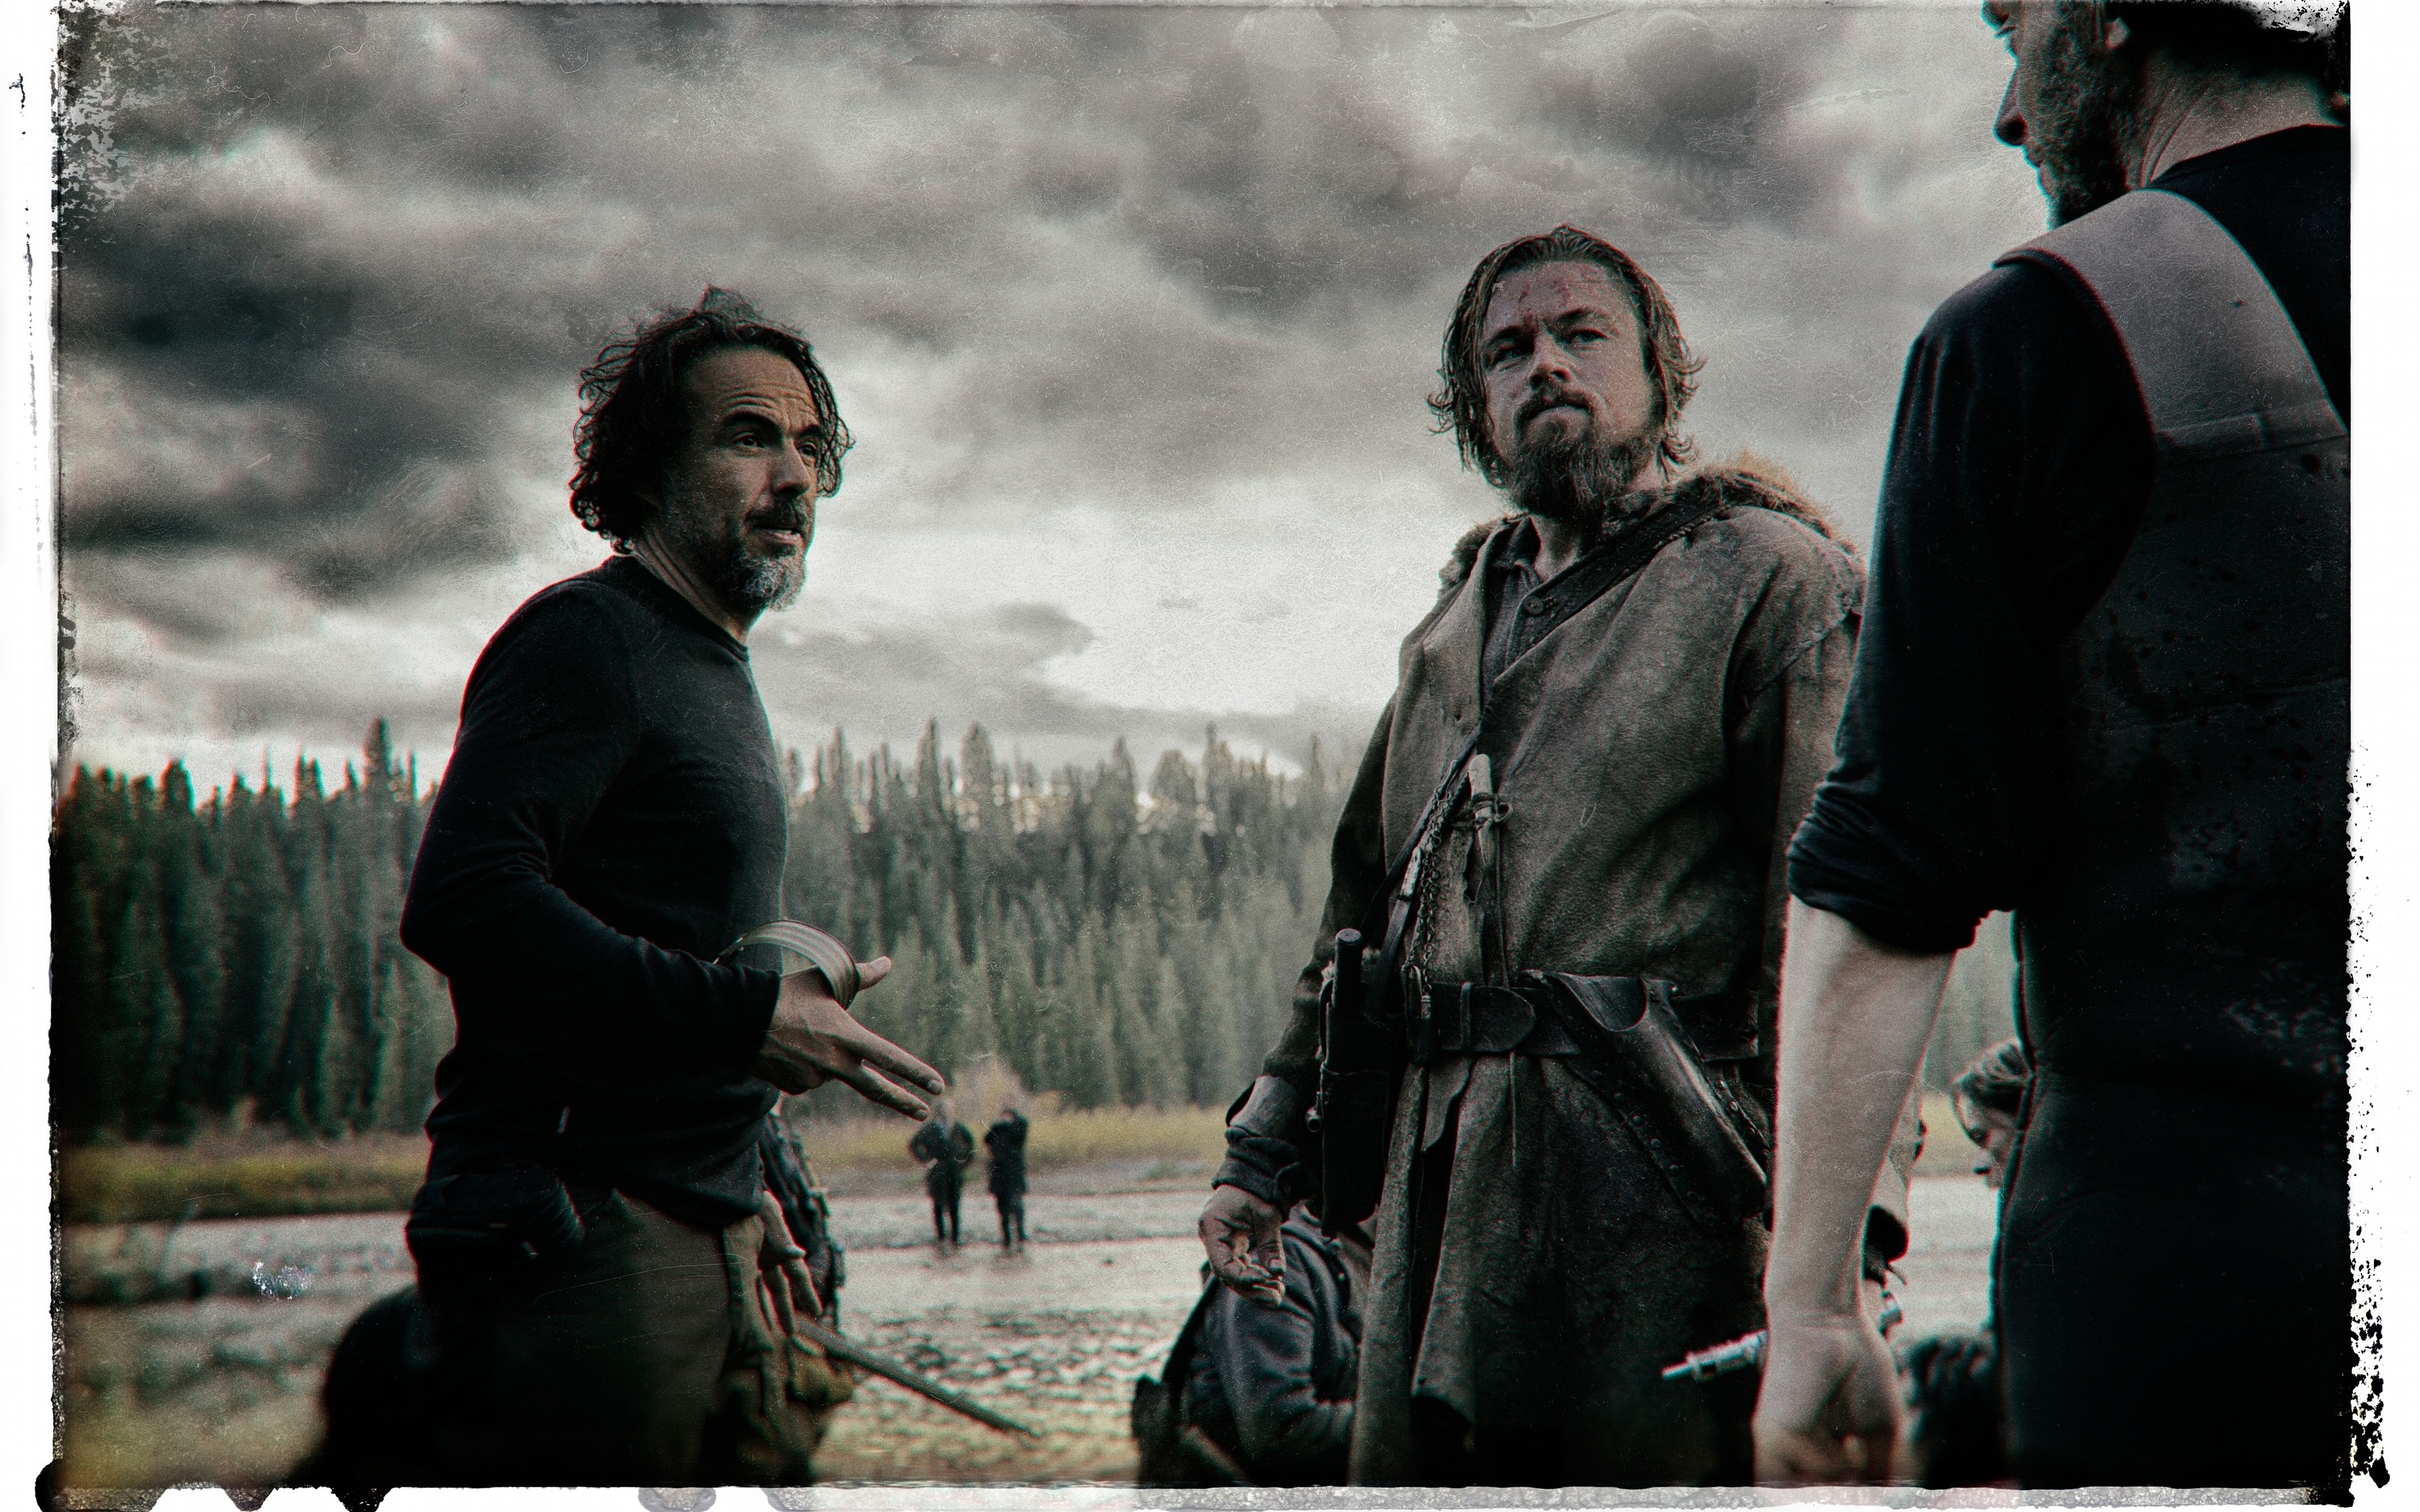 The Revenant Cast for 3840 x 2400 Widescreen resolution